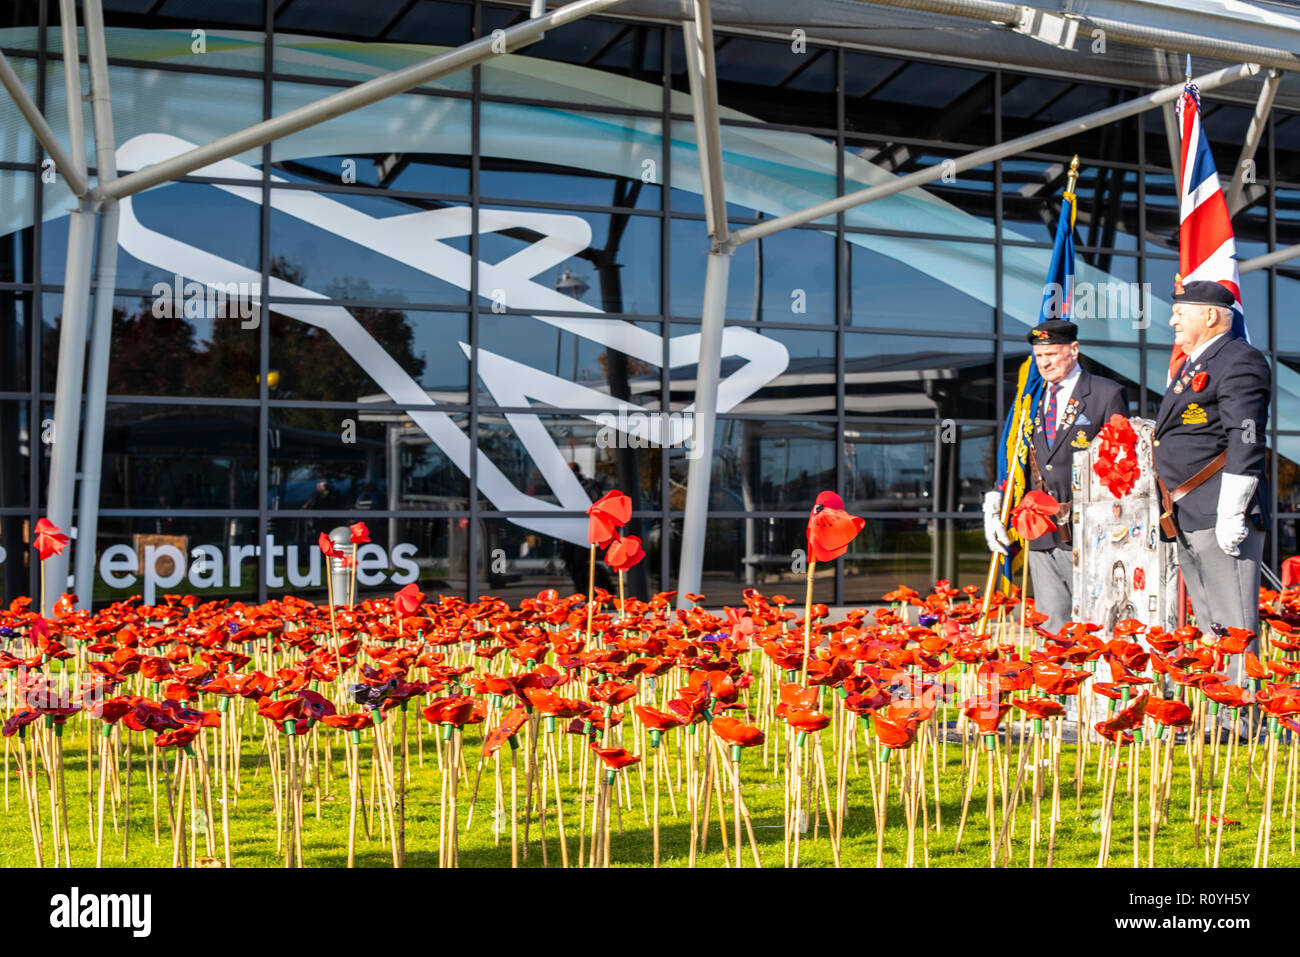 London Southend Airport, Essex, UK. To mark the centenary of the end of World War One a commemorative garden has been opened outside the terminal at London Southend Airport consisting of 2000 red ceramic poppies made by hundreds of children from 25 Southend schools. The airport served as RAF Rochford during both World Wars. Departures terminal Stock Photo